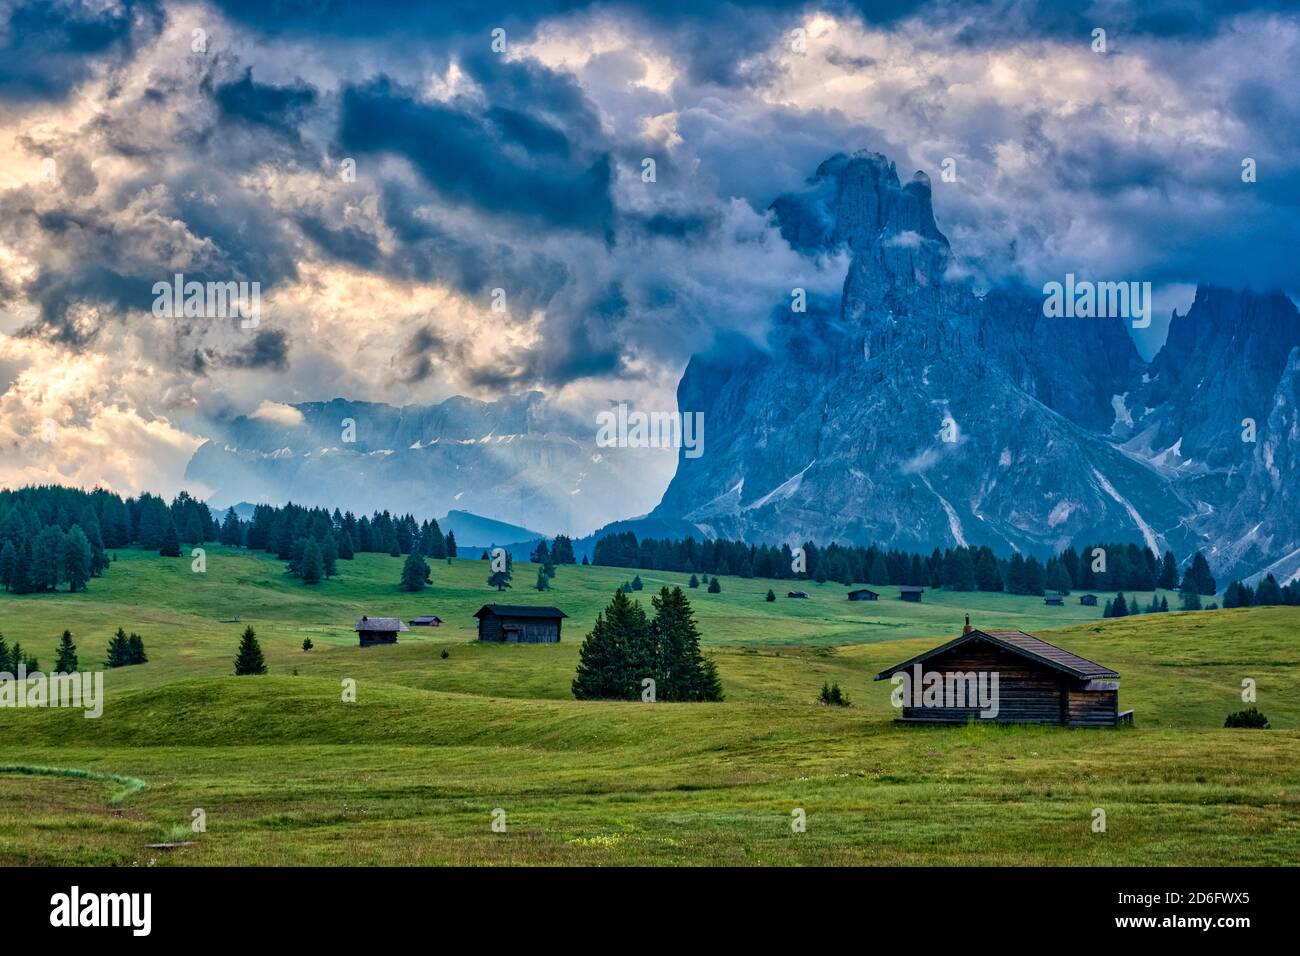 Hilly agricultural countryside with green pastures, trees and wooden huts at Seiser Alm, Alpe di Siusi, the mountain Plattkofel, Sasso Piatto, surroun Stock Photo